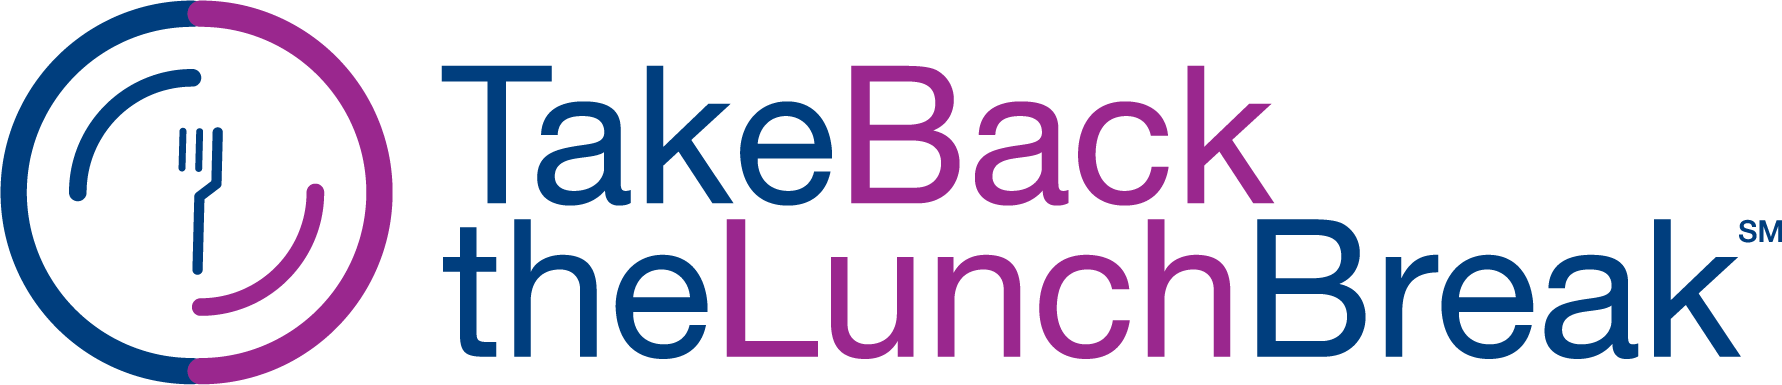 Take back the lunch break free downloadable toolkit of resources for restaurant owners to engage and attract diners 